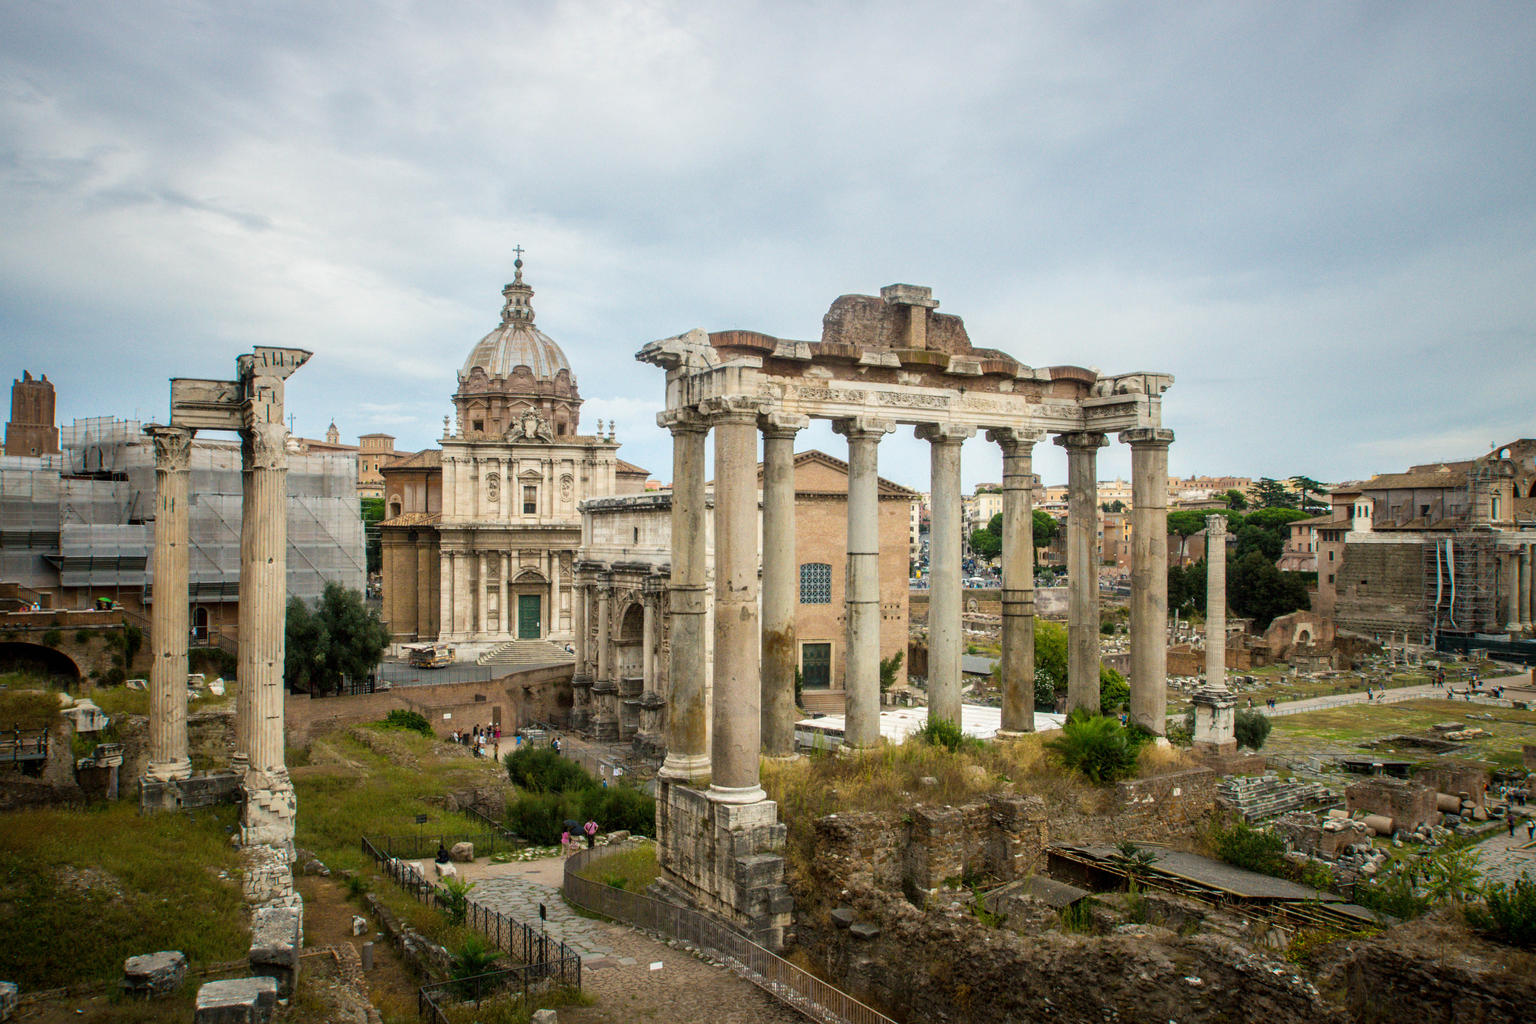 View of the Forum